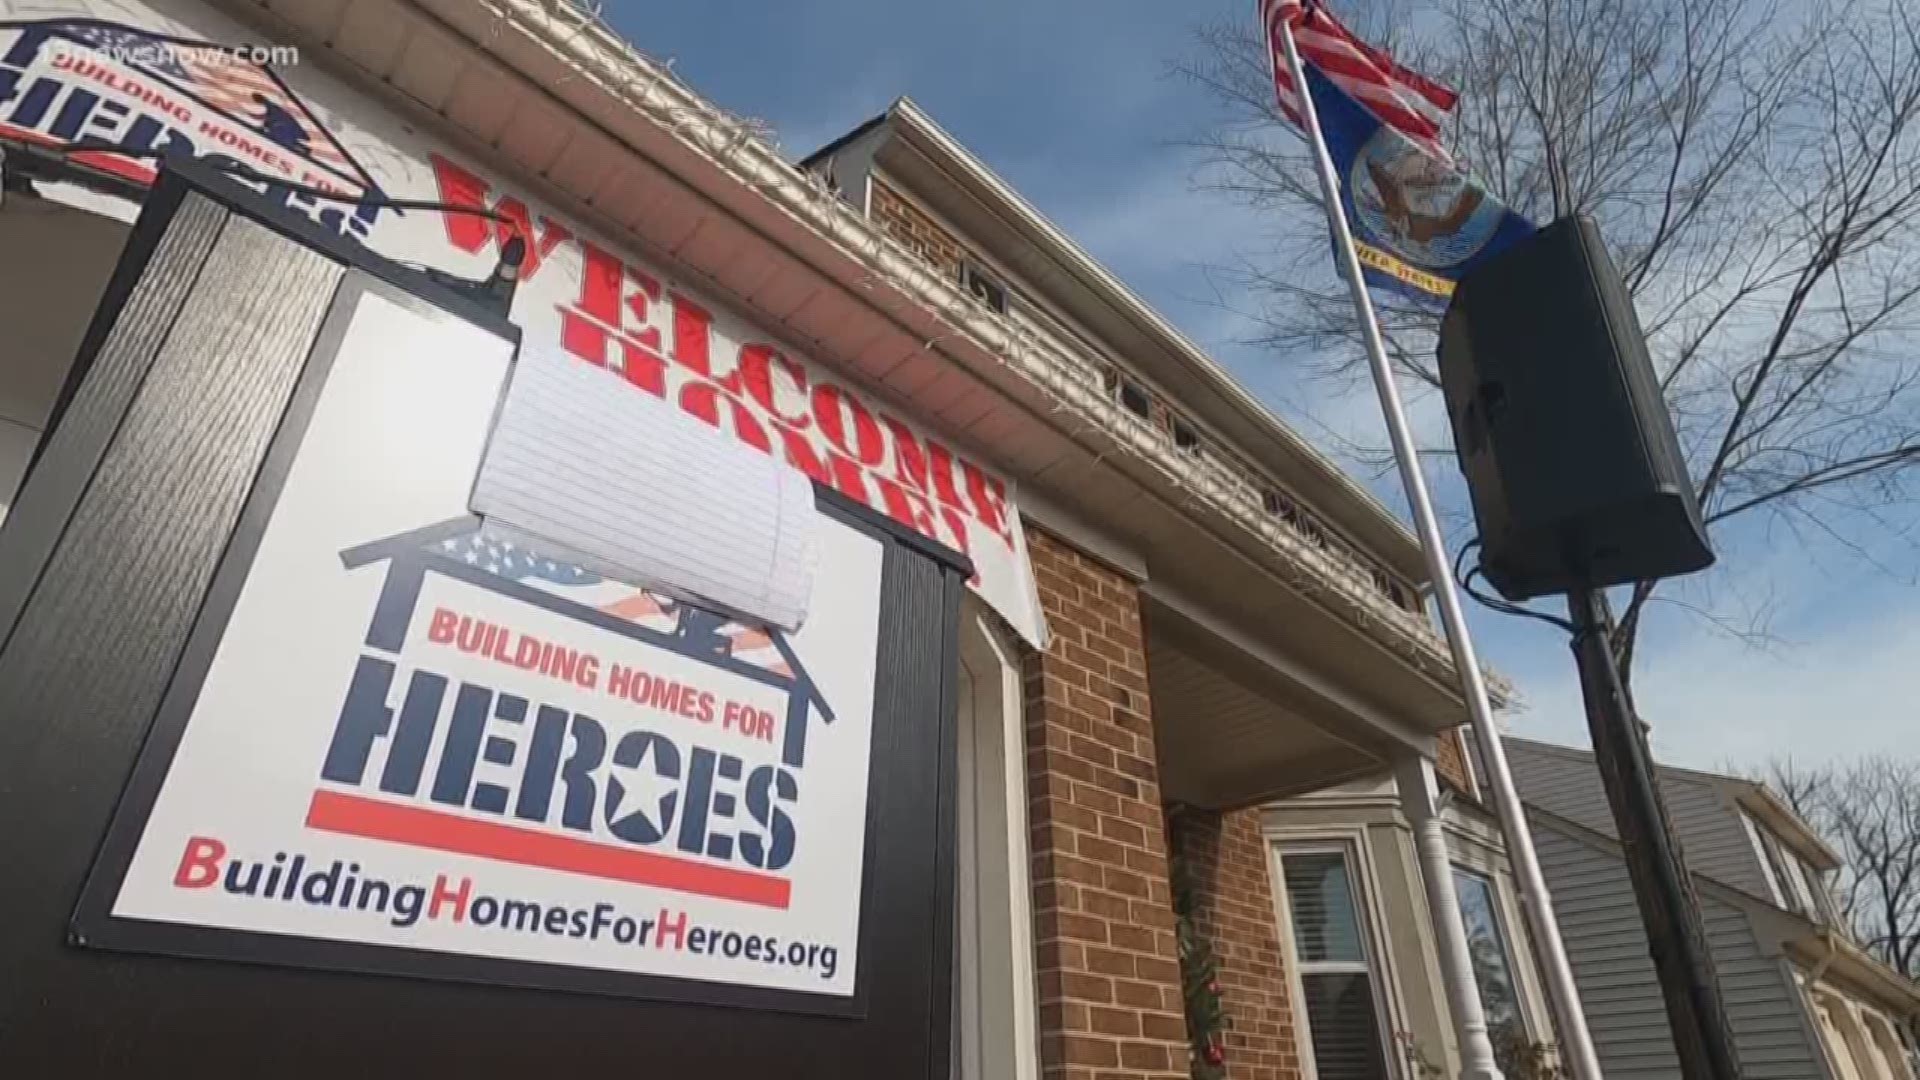 Building Homes for Heroes gave the home to Retired Navy Lieutenant Patrick Ferguson. The group builds or renovates homes and gives them to veterans, mortgage free.